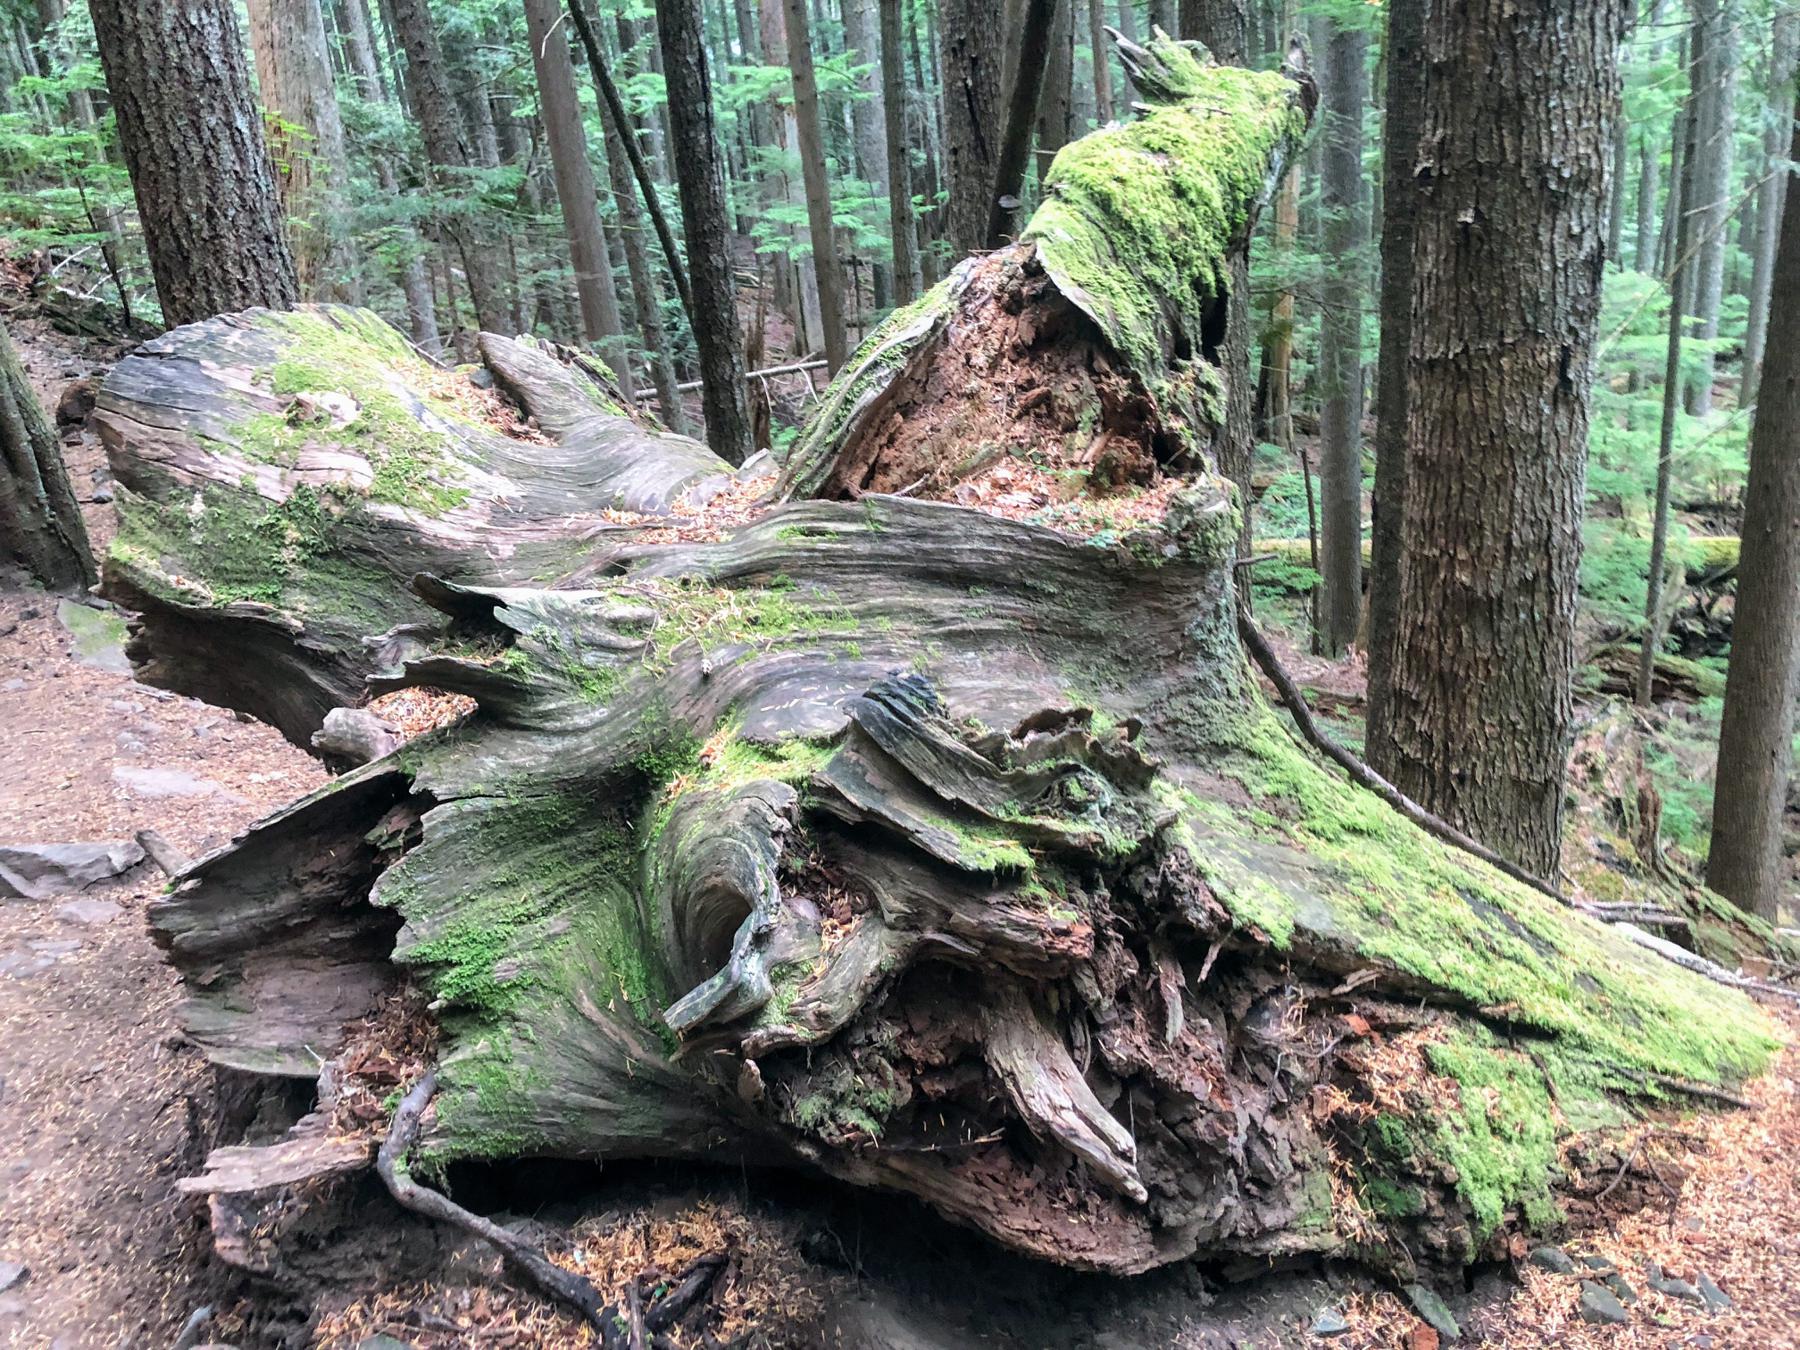 Check out this gnarled tree stump